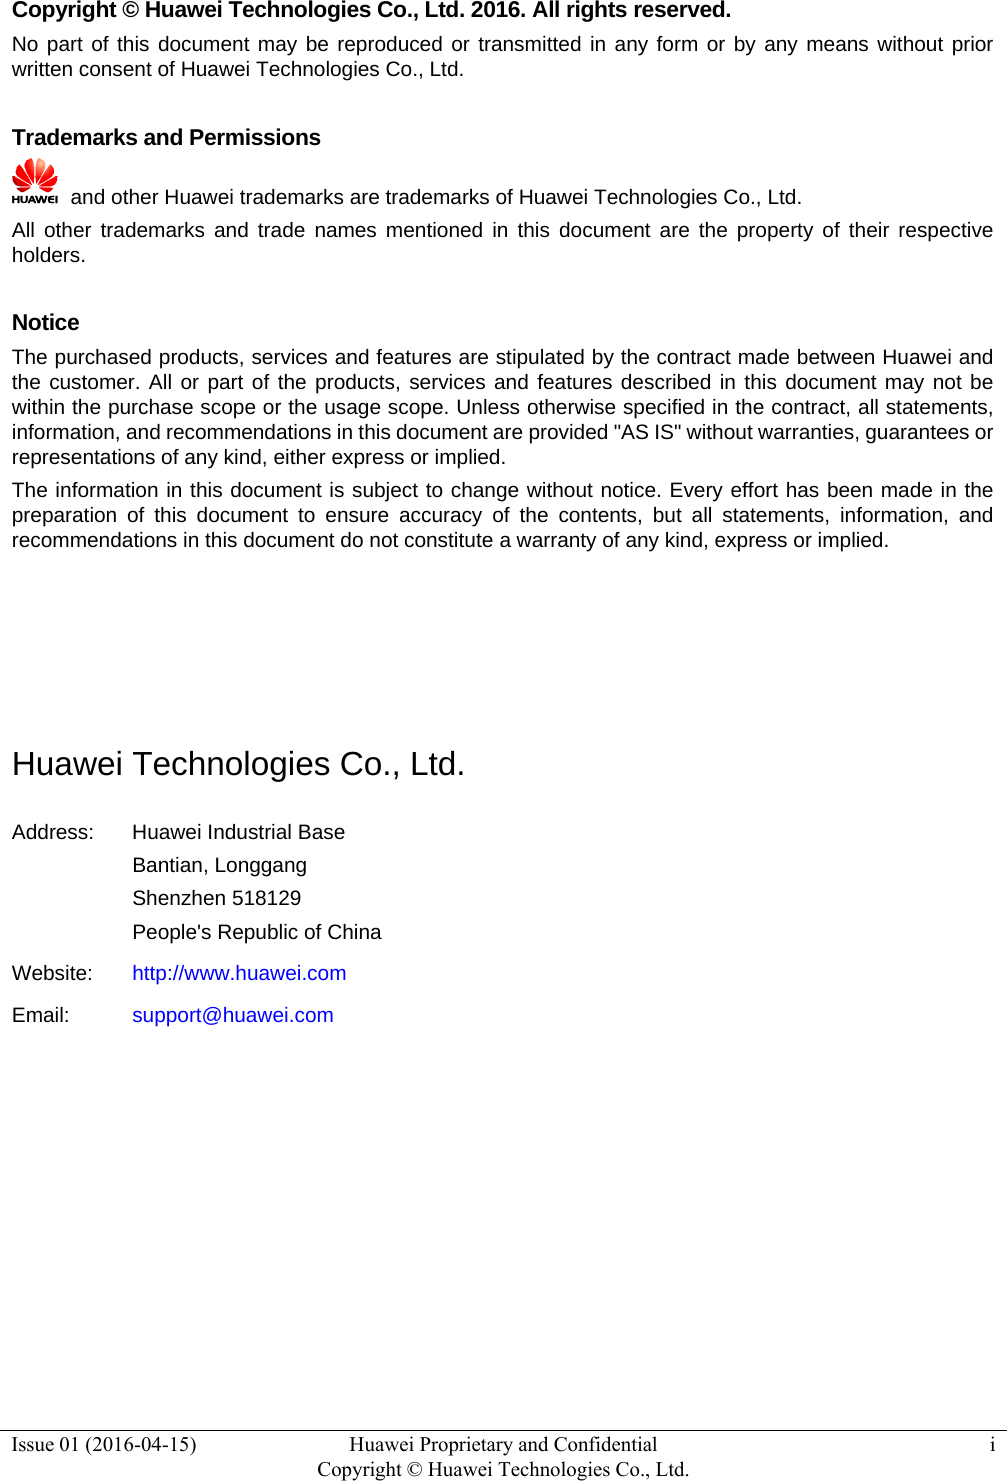  Issue 01 (2016-04-15)  Huawei Proprietary and Confidential         Copyright © Huawei Technologies Co., Ltd.i  Copyright © Huawei Technologies Co., Ltd. 2016. All rights reserved. No part of this document may be reproduced or transmitted in any form or by any means without prior written consent of Huawei Technologies Co., Ltd.  Trademarks and Permissions   and other Huawei trademarks are trademarks of Huawei Technologies Co., Ltd. All other trademarks and trade names mentioned in this document are the property of their respective holders.  Notice The purchased products, services and features are stipulated by the contract made between Huawei and the customer. All or part of the products, services and features described in this document may not be within the purchase scope or the usage scope. Unless otherwise specified in the contract, all statements, information, and recommendations in this document are provided &quot;AS IS&quot; without warranties, guarantees or representations of any kind, either express or implied. The information in this document is subject to change without notice. Every effort has been made in the preparation of this document to ensure accuracy of the contents, but all statements, information, and recommendations in this document do not constitute a warranty of any kind, express or implied.     Huawei Technologies Co., Ltd. Address:  Huawei Industrial Base Bantian, Longgang Shenzhen 518129 People&apos;s Republic of China Website:  http://www.huawei.com Email:  support@huawei.com          